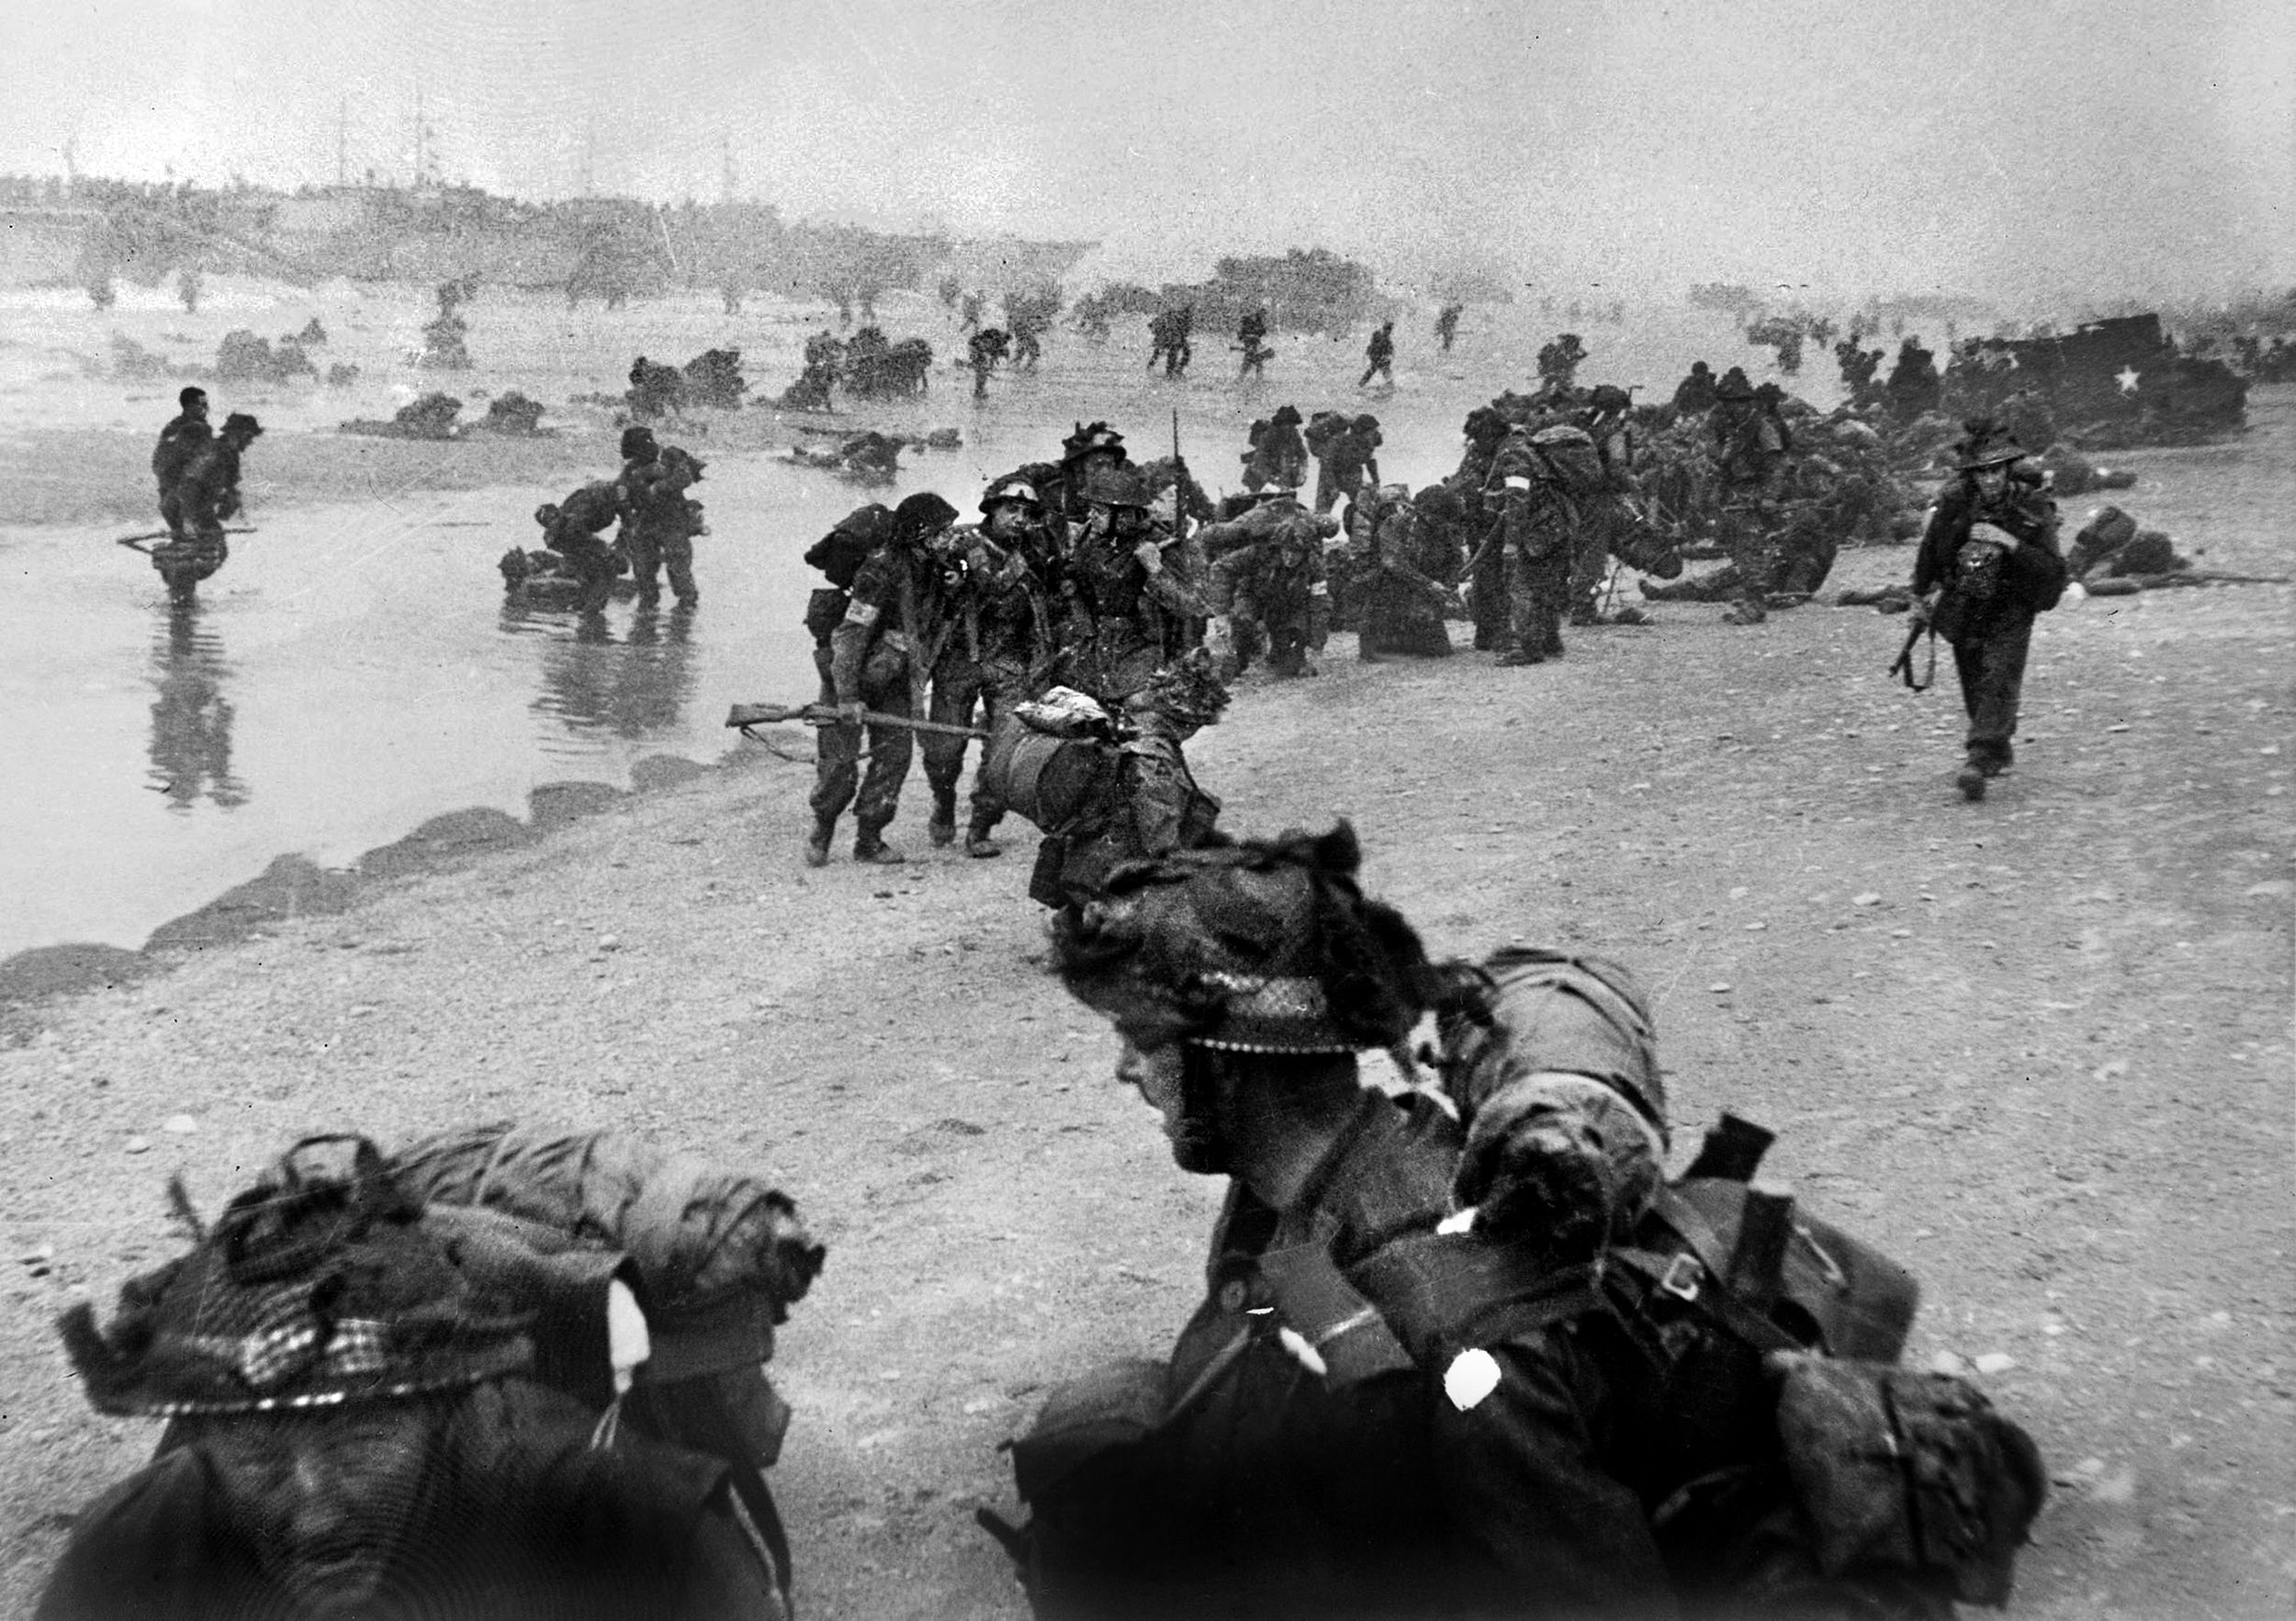 Troops from several units fight the Germans and prepare wounded for evacuation from the Queen Red sector of Sword Beach. Commandos of the 1st Special Service Brigade disembark from landing craft in the background.